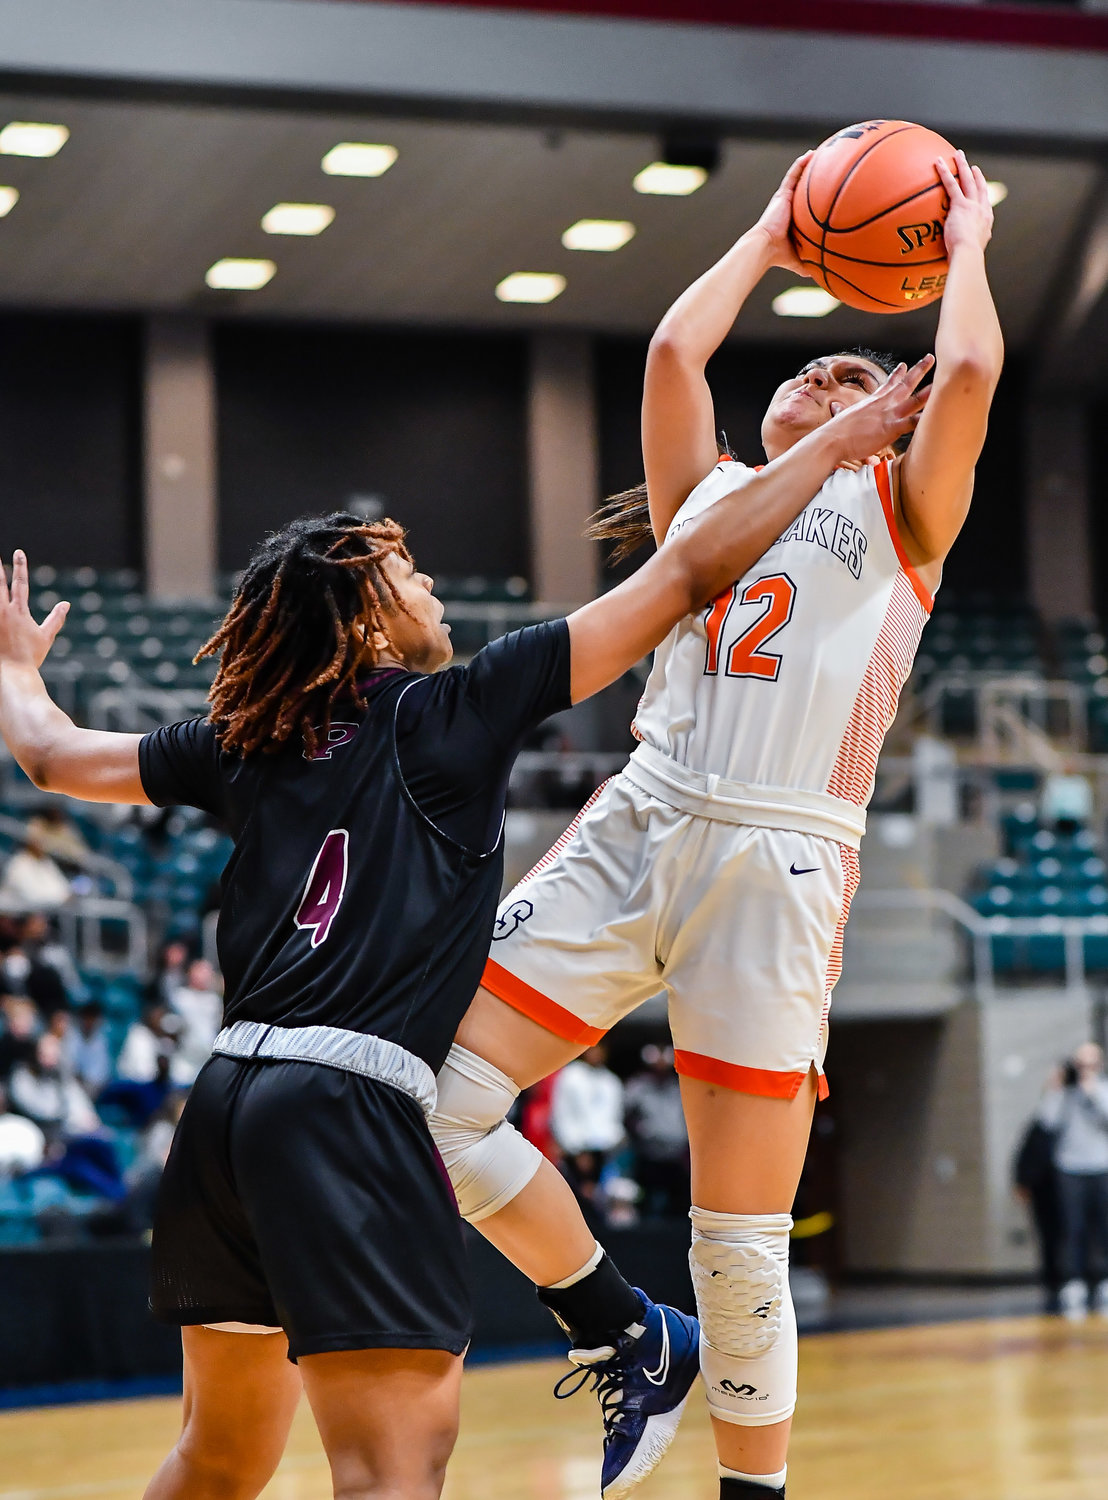 Katy Tx. Feb 25, 2022:  Seven Lakes Cailyn Tucker #12 drives to the basket guarded by Pearlands Paige Bonner #4 during the Regional SemiFinal playoff game, Seven Lakes vs Pearland at the Merrell Center. (Photo by Mark Goodman / Katy Times)